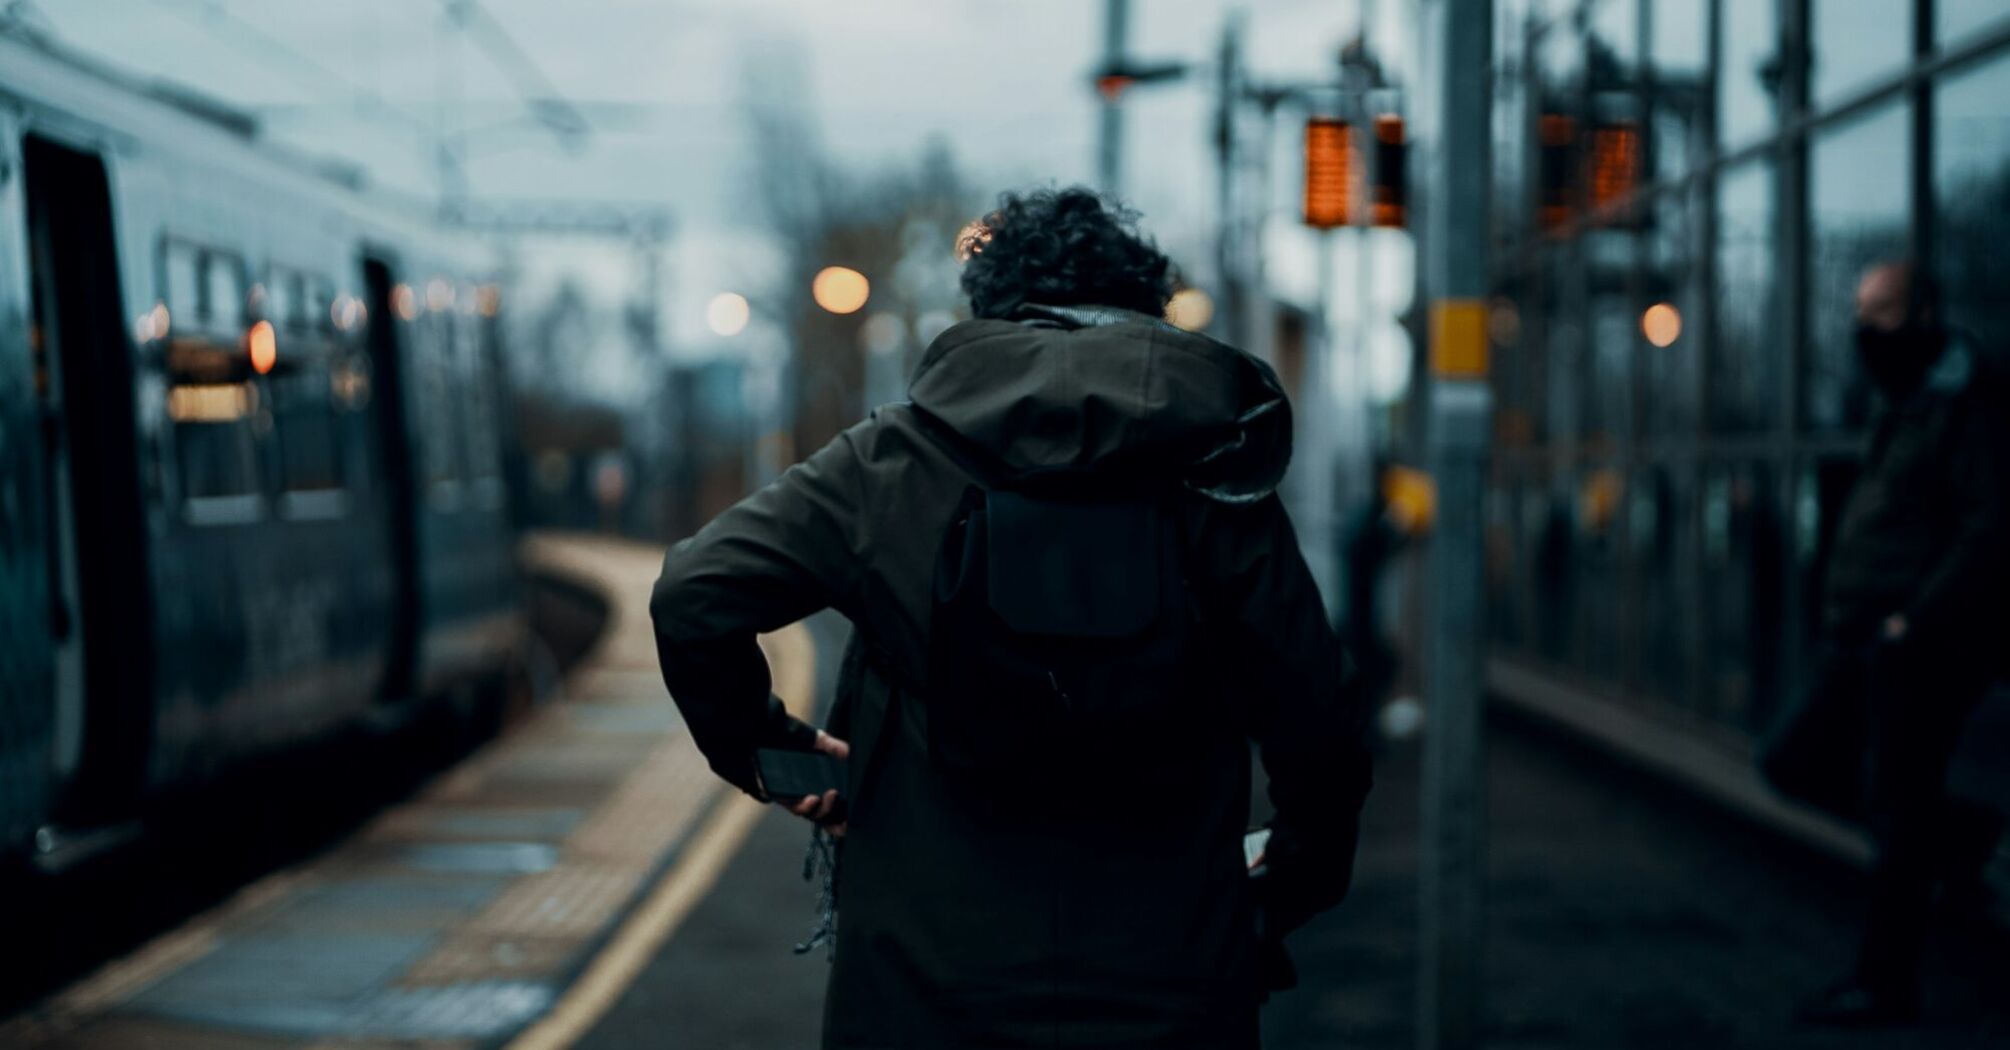 A person with a backpack waits on a train platform as a train arrives in the early morning or late evening